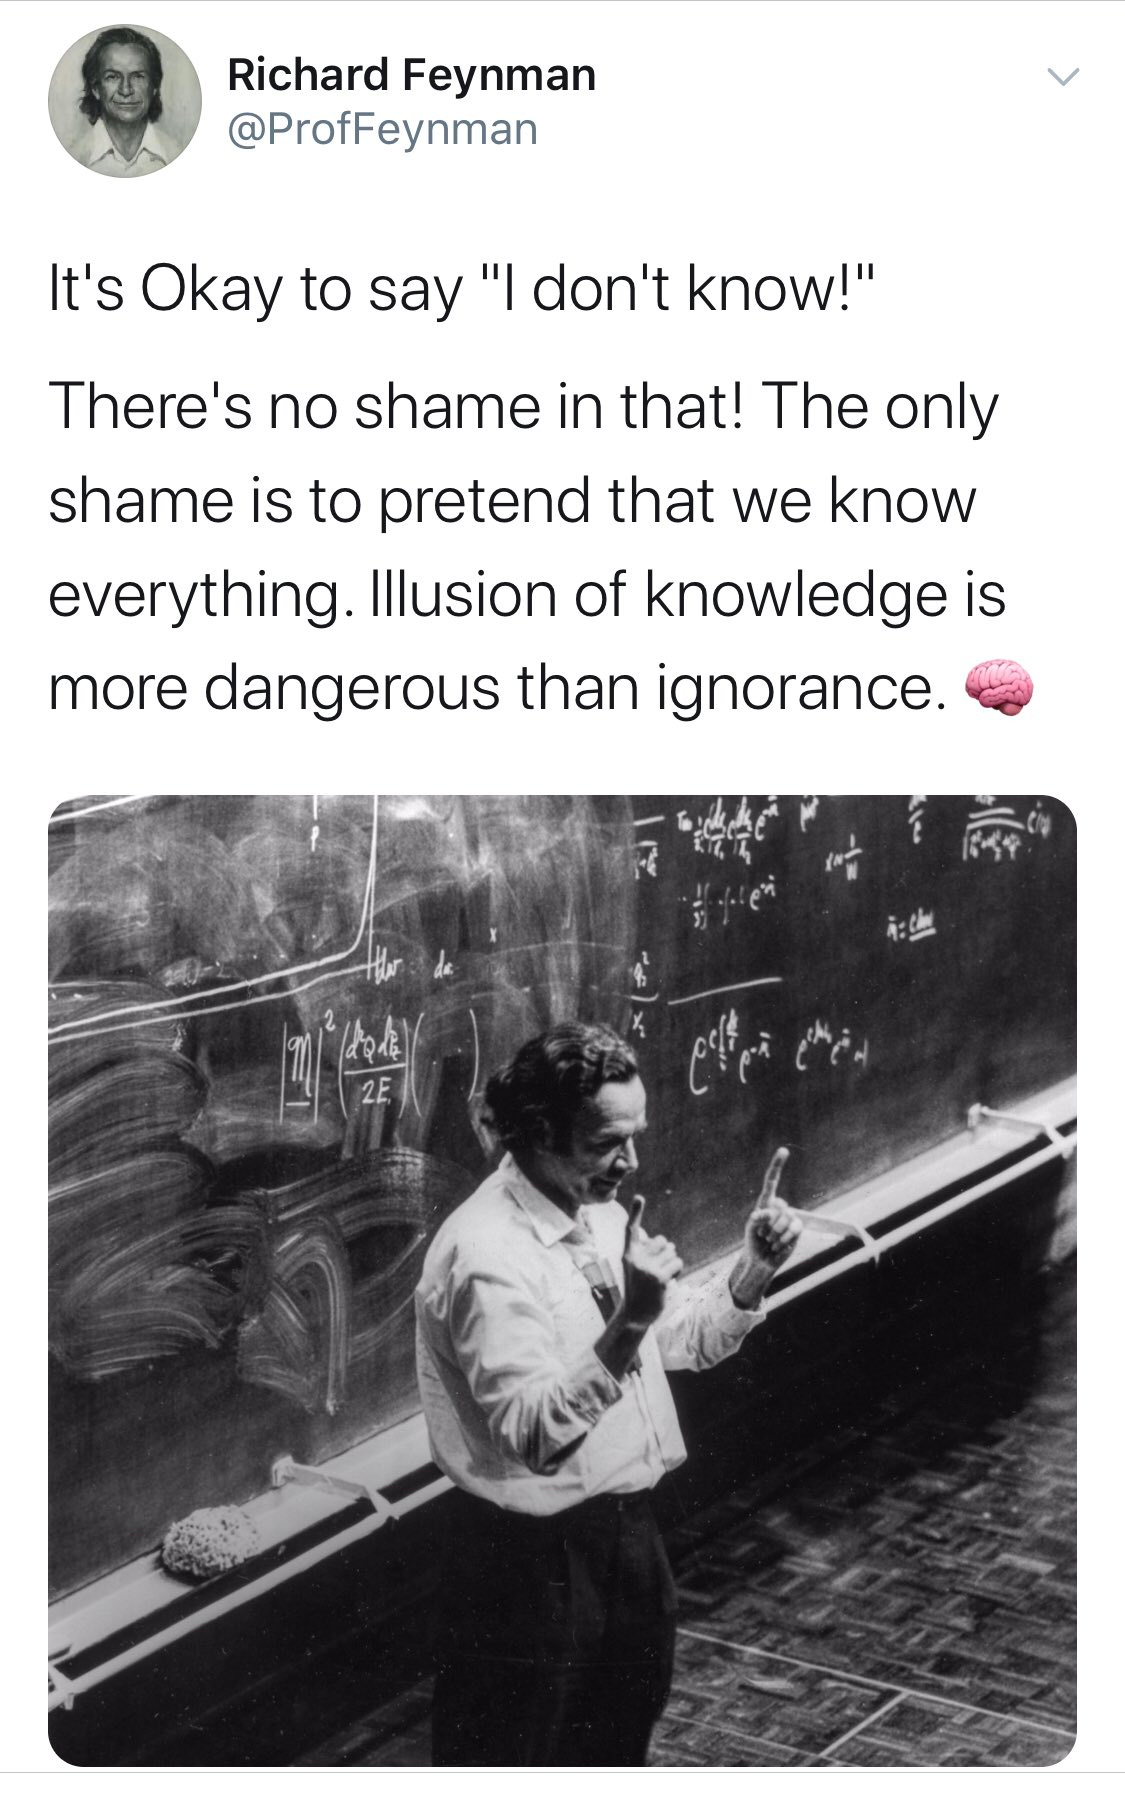 Umar Saif on X: "Illusion of knowledge is more dangerous than ignorance.  https://t.co/AMl3gVPmcB" / X